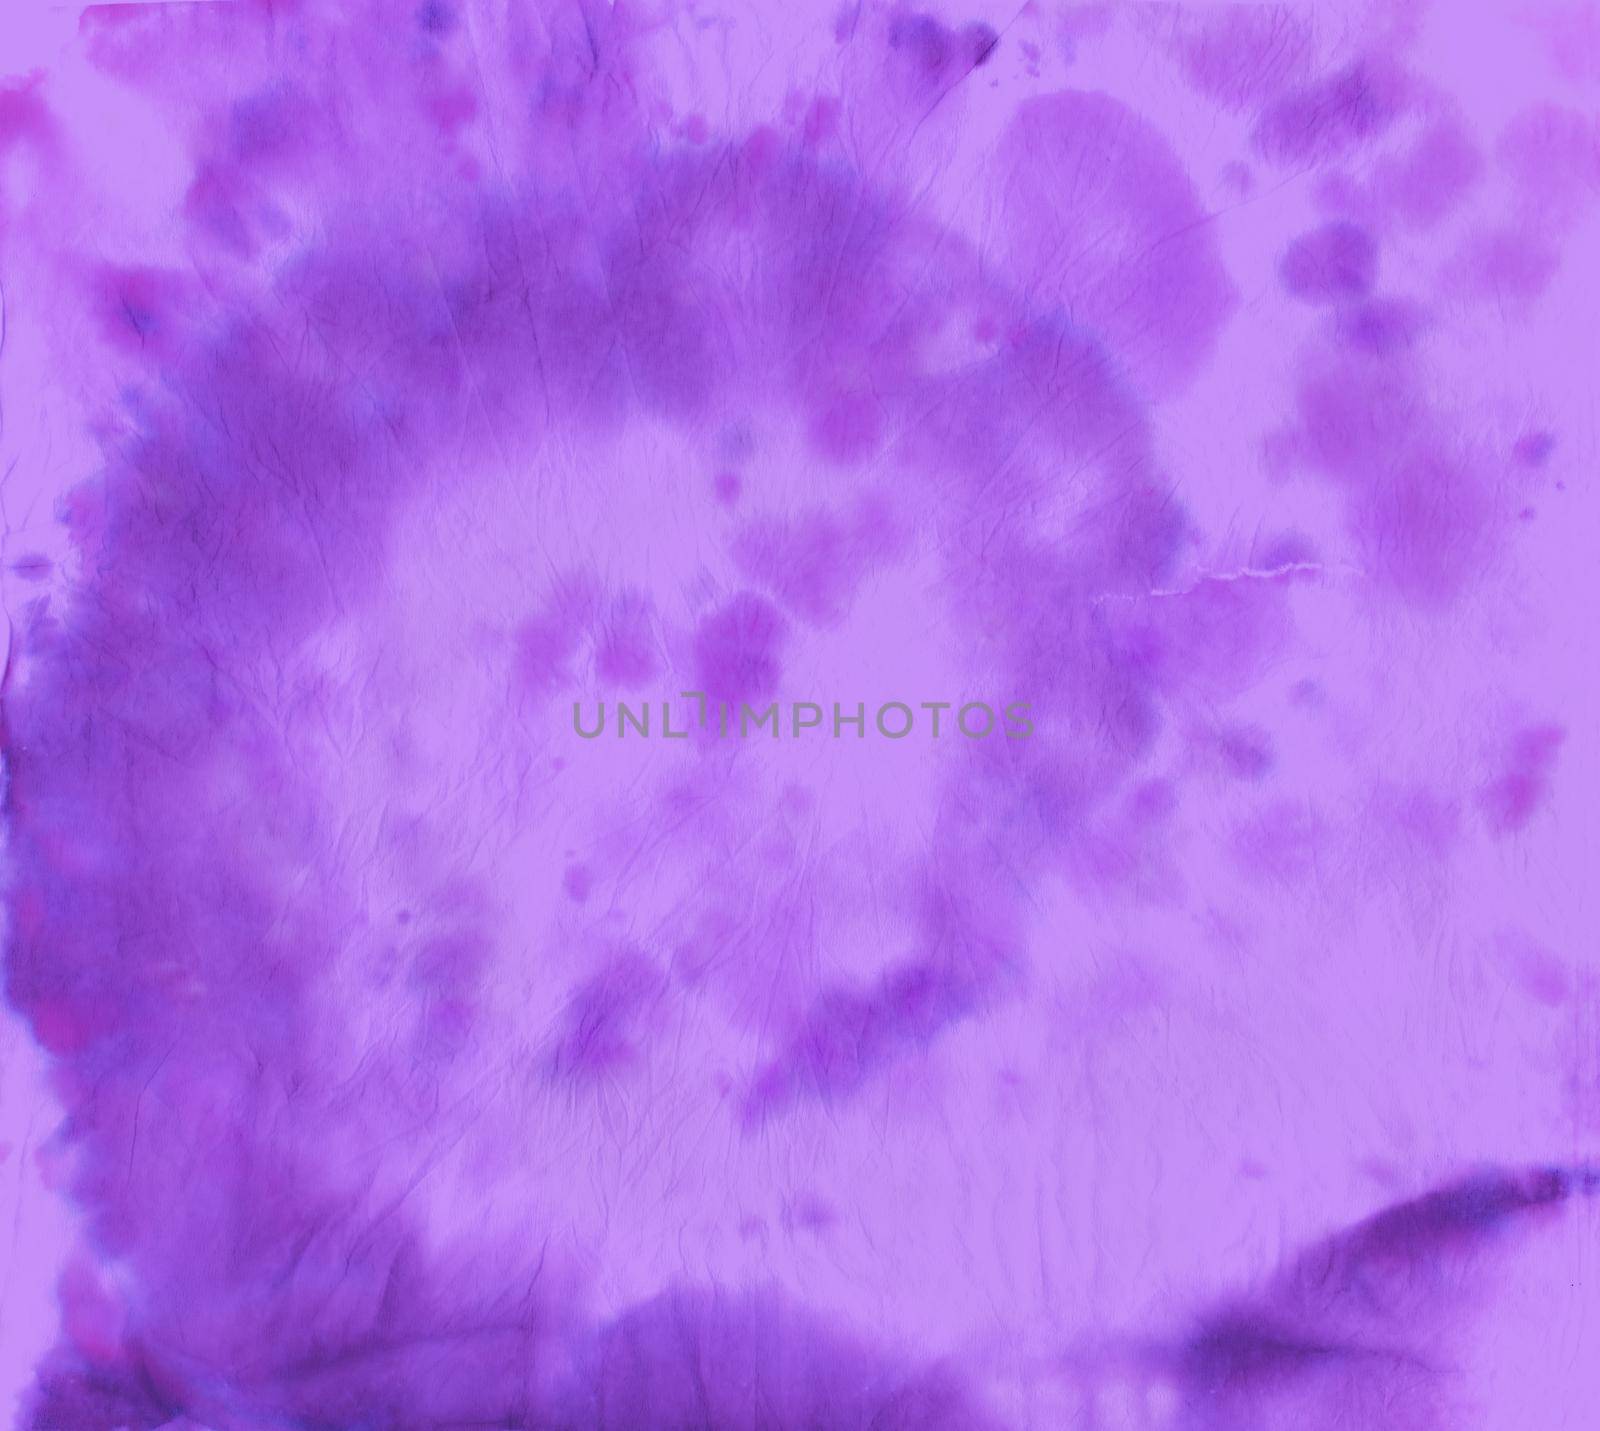 Purple Tie Dye Effects. Circular Water Paint. Batik Light Painting. Artistic Fabric. Tye Die Circle Backdrop. Abstract Swirl Design. Color Shirt. Psychedelic Cool Pattern. Tie Dye Effects.